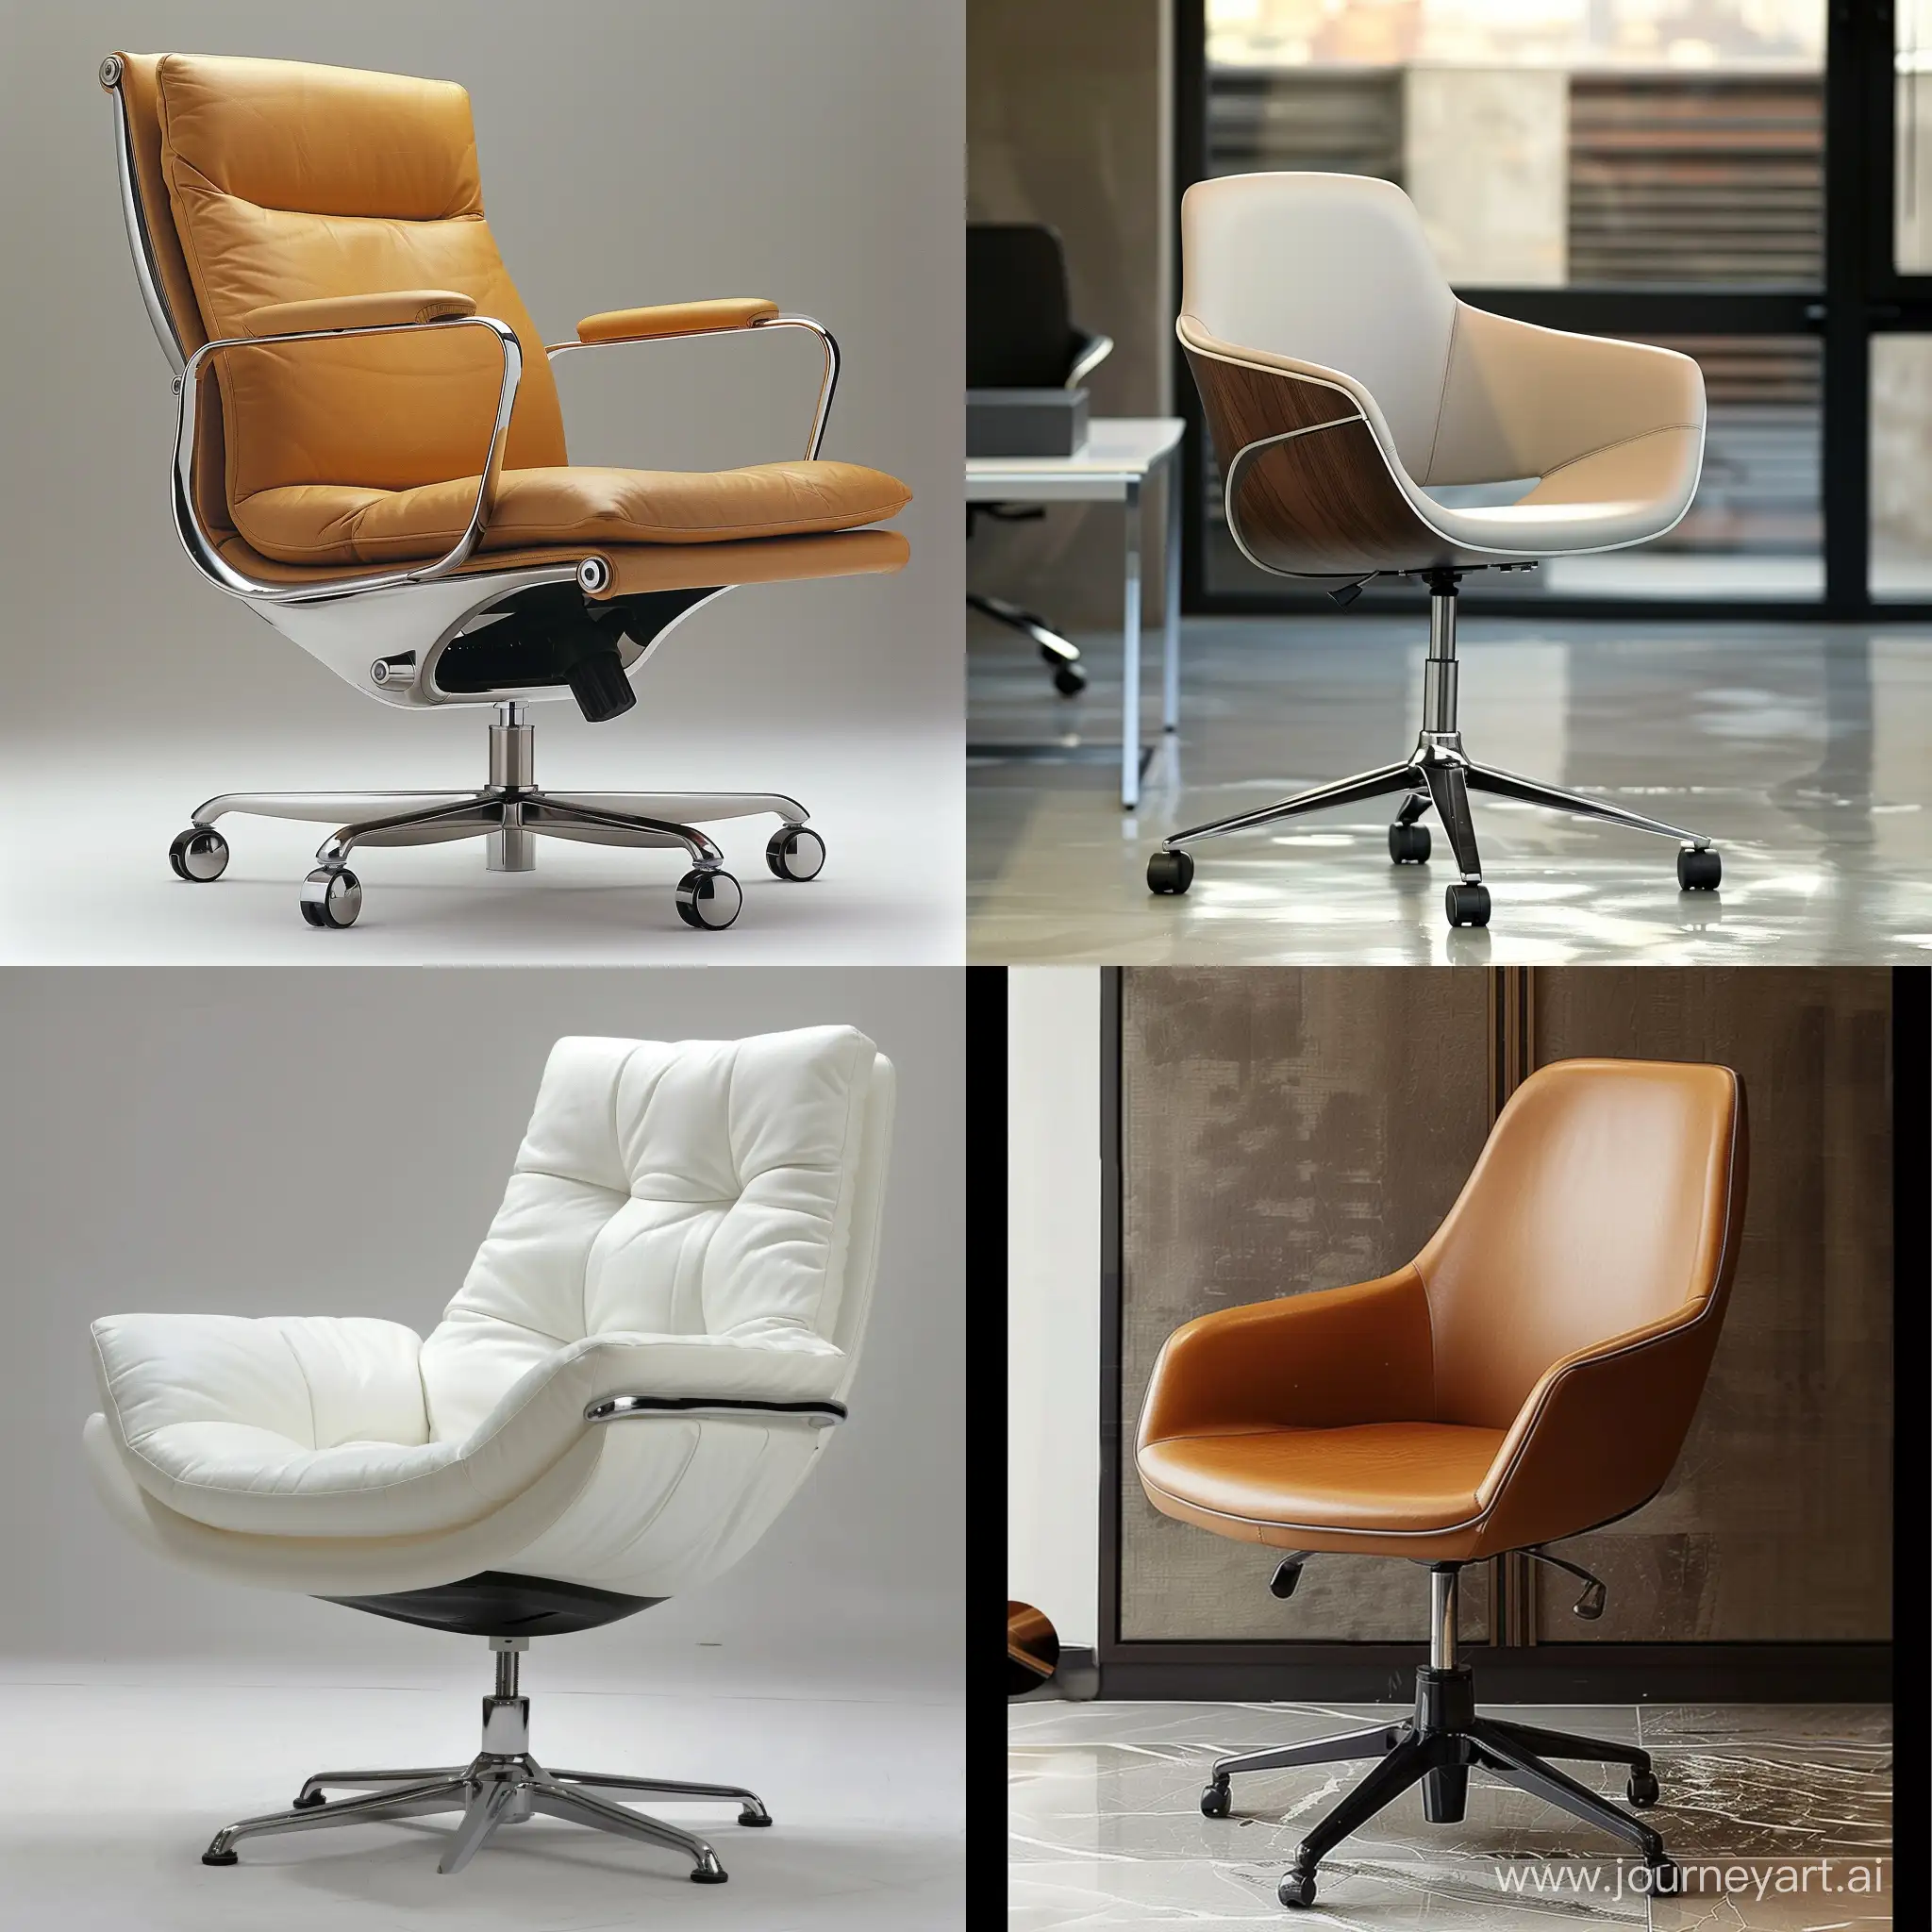 Modern-Style-Office-Chairs-in-Sleek-Setting